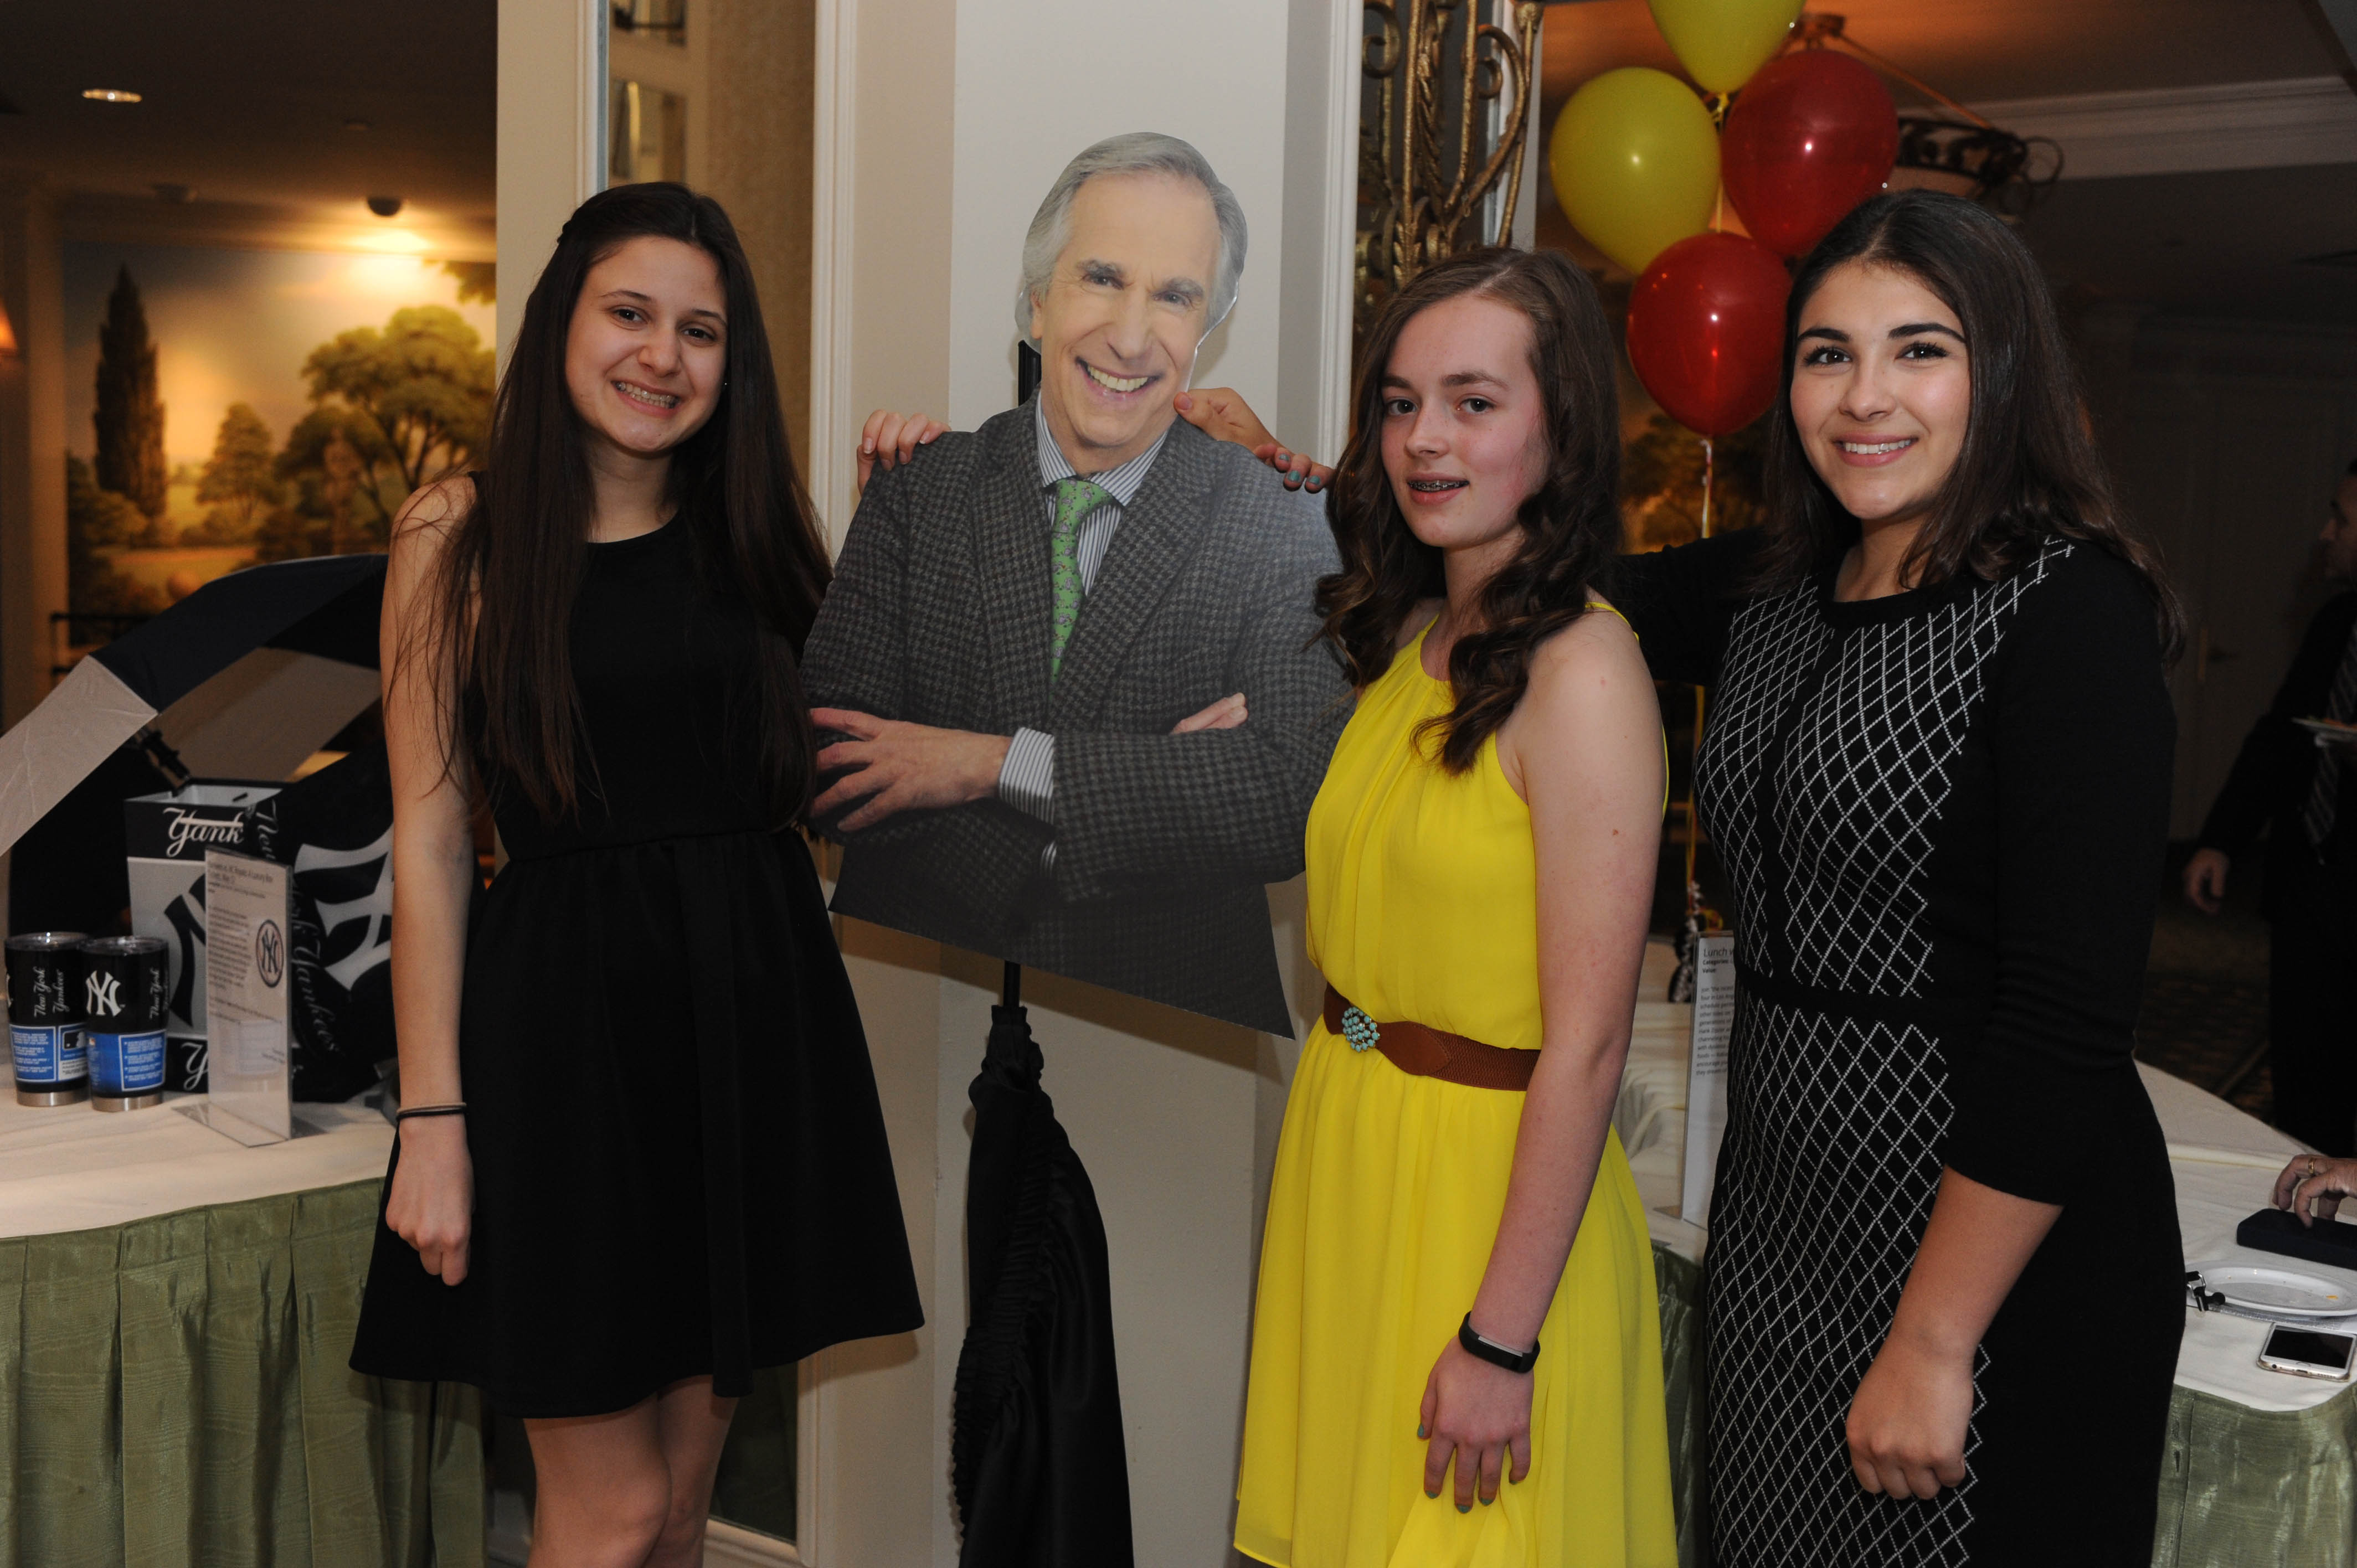 SKLD Youth Achievement Award Winners having fun at the selfie station with cutout of SKLD Honorary Chairman, Henry Winkler